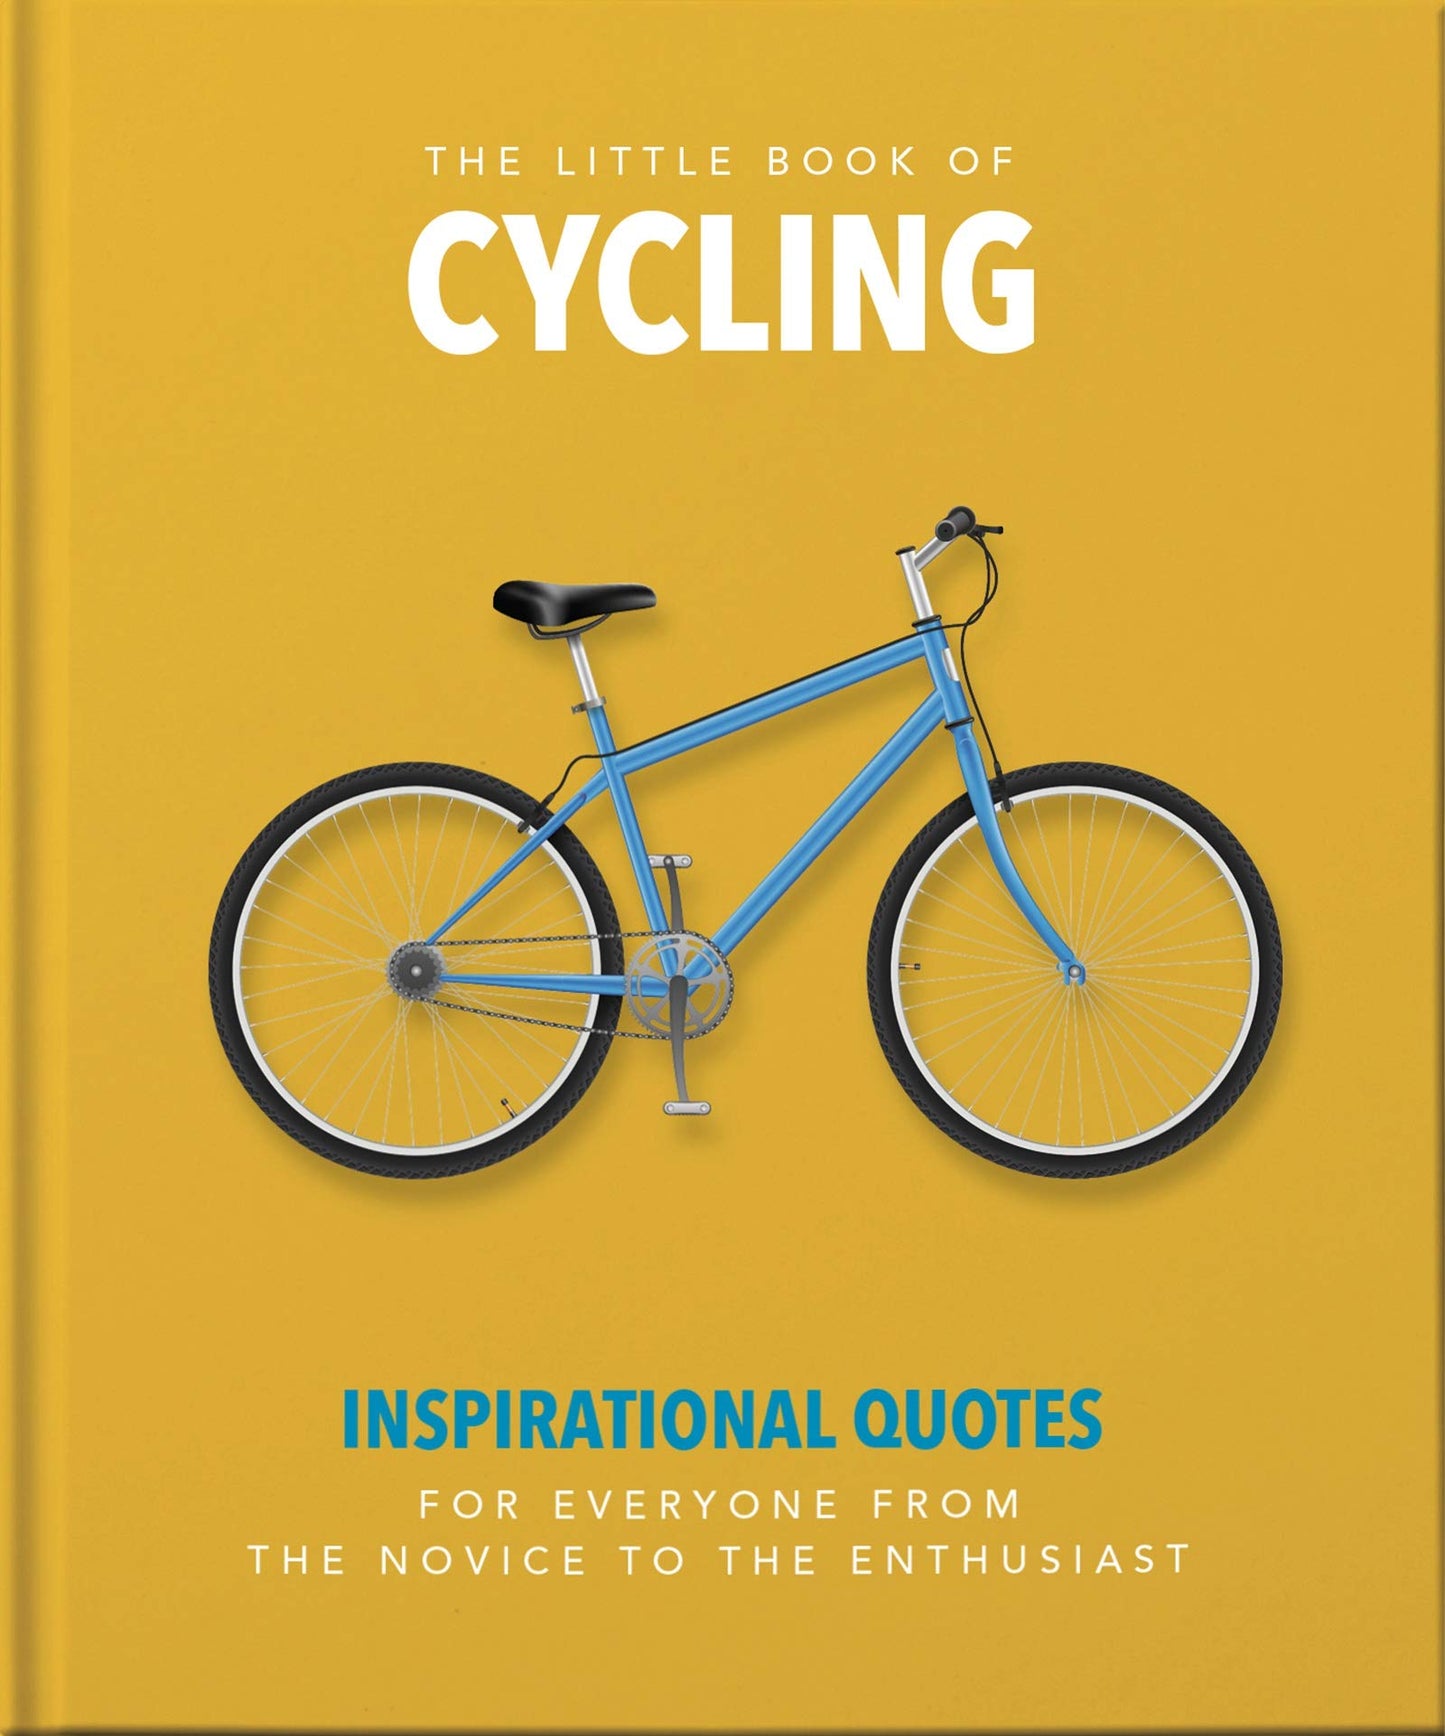 front cover of book is yellow with a blue bicycle, title of book in white